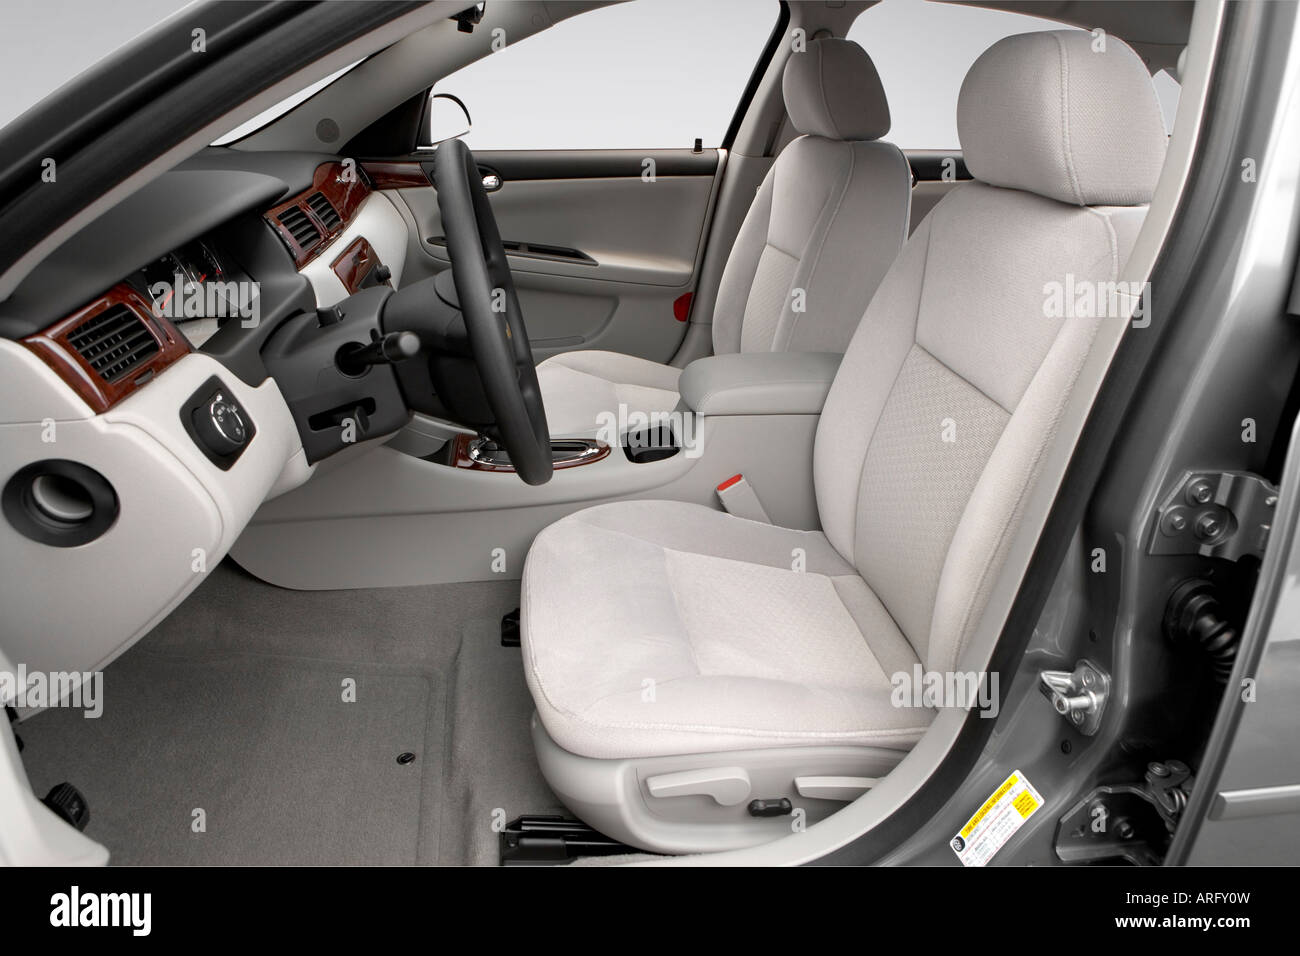 2008 Chevrolet Impala Lt In Silver Front Seats Stock Photo